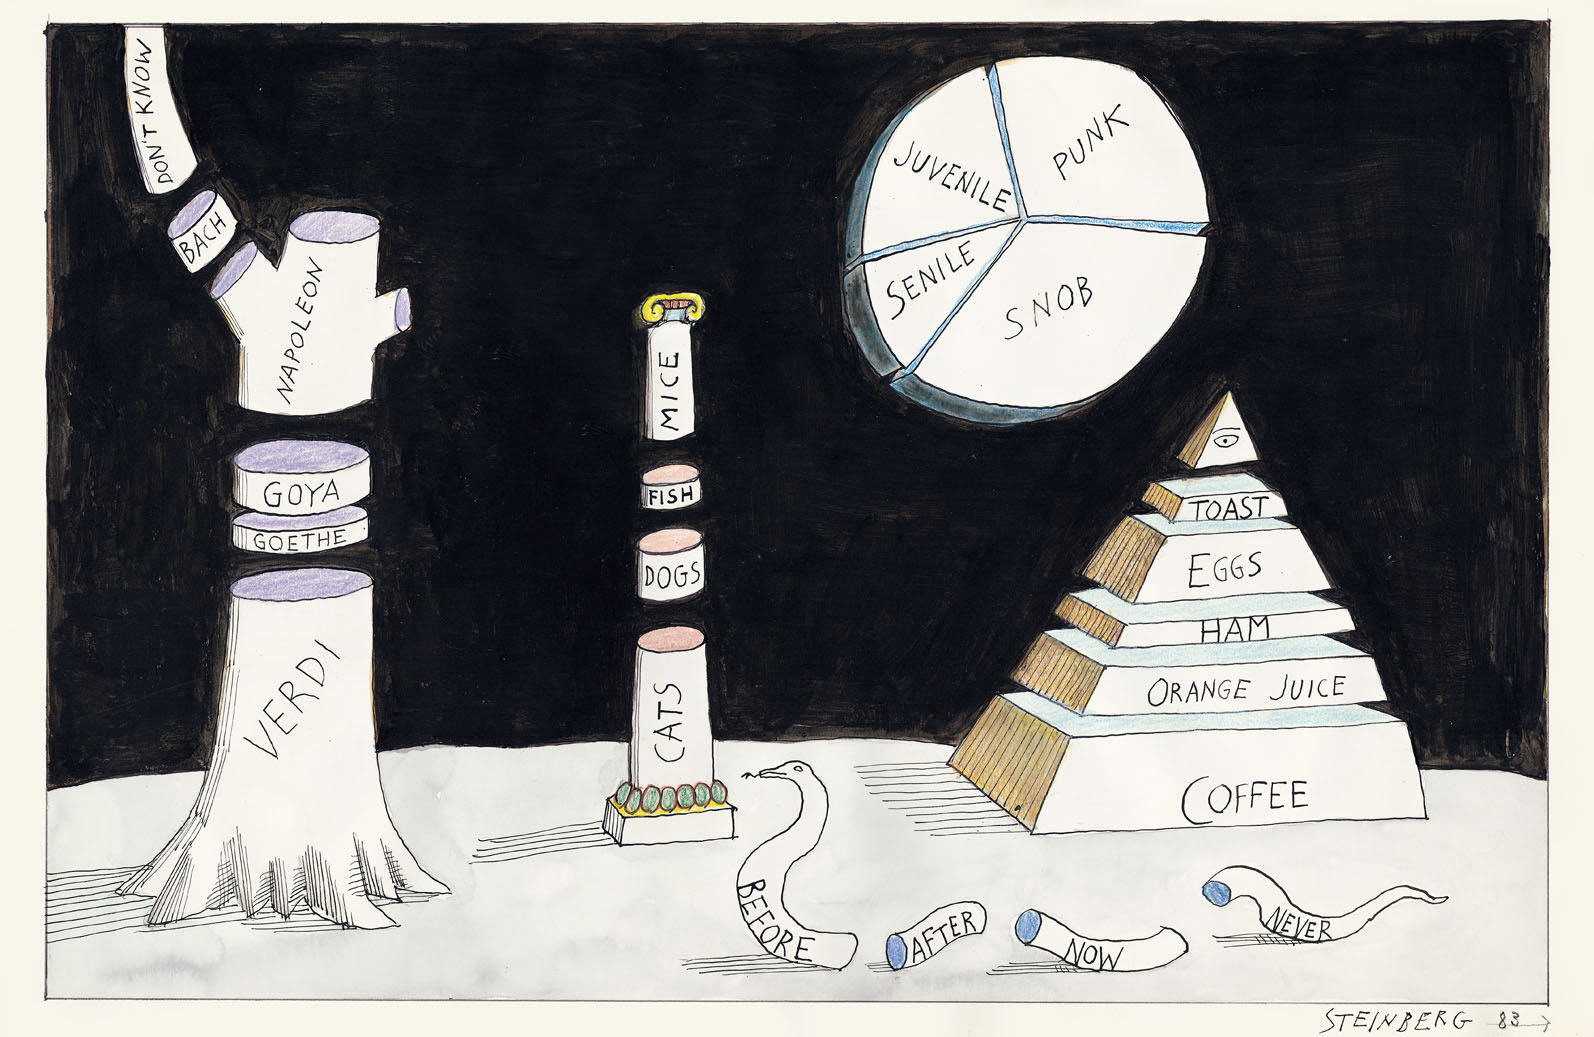 Original drawing for the portfolio “Statistics,” The New Yorker, February 21, 1983. Ink, pencil, watercolor, and crayon on paper, 14 ½ x 23 in. Centre Pompidou, Paris; Gift of The Saul Steinberg Foundation.